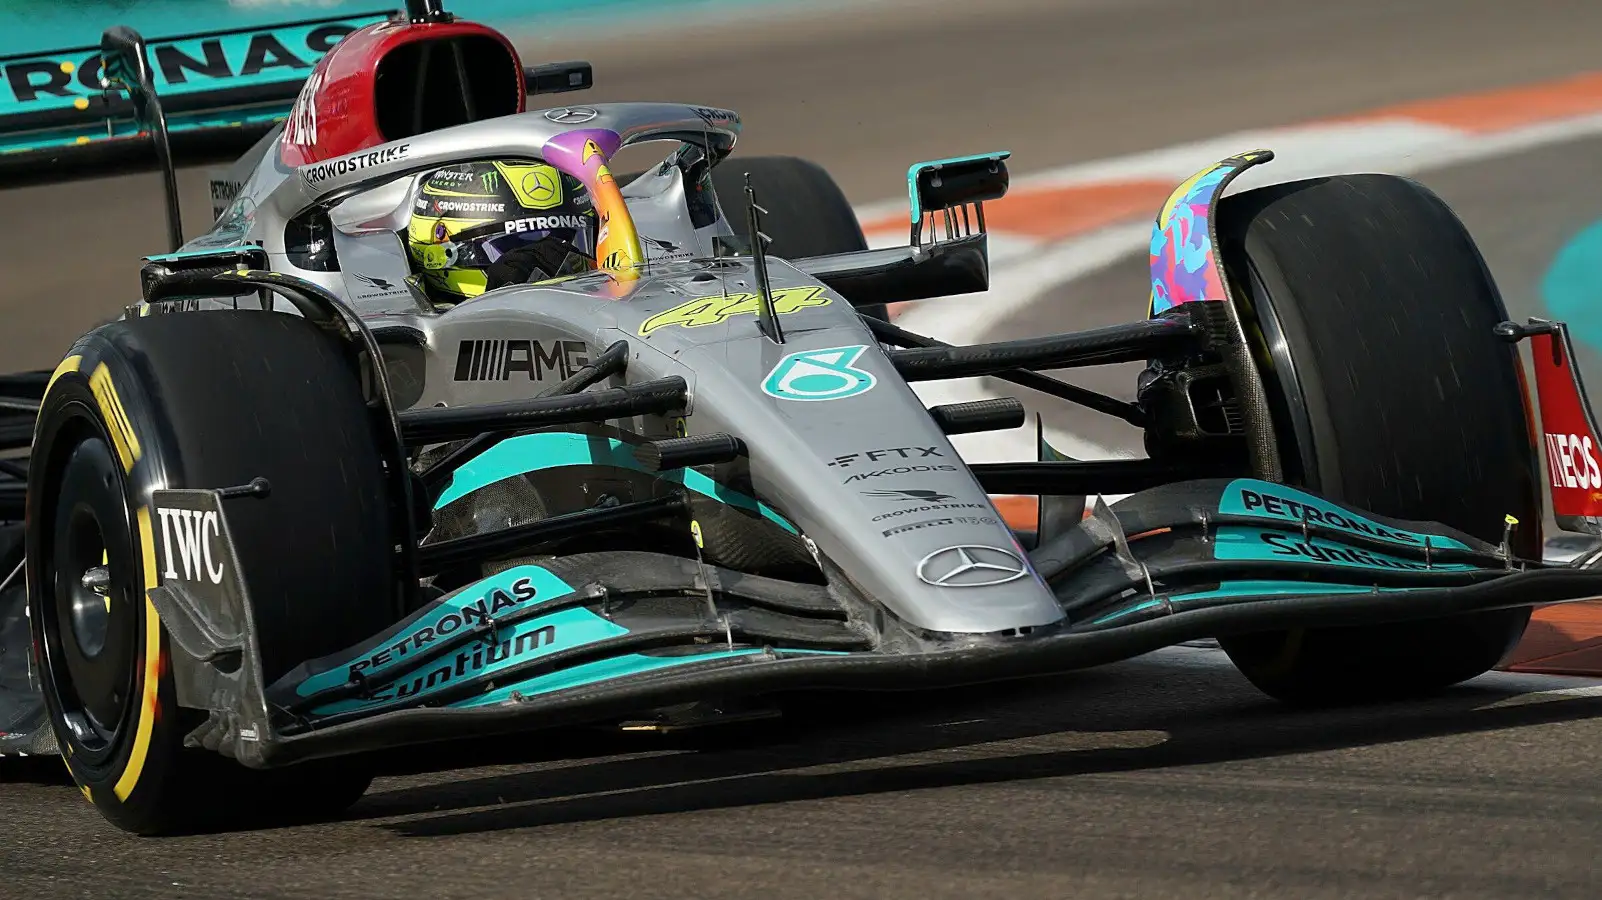 Lewis Hamilton running the Miami upgraded front wing on the Mercedes W13. Miami May 2022